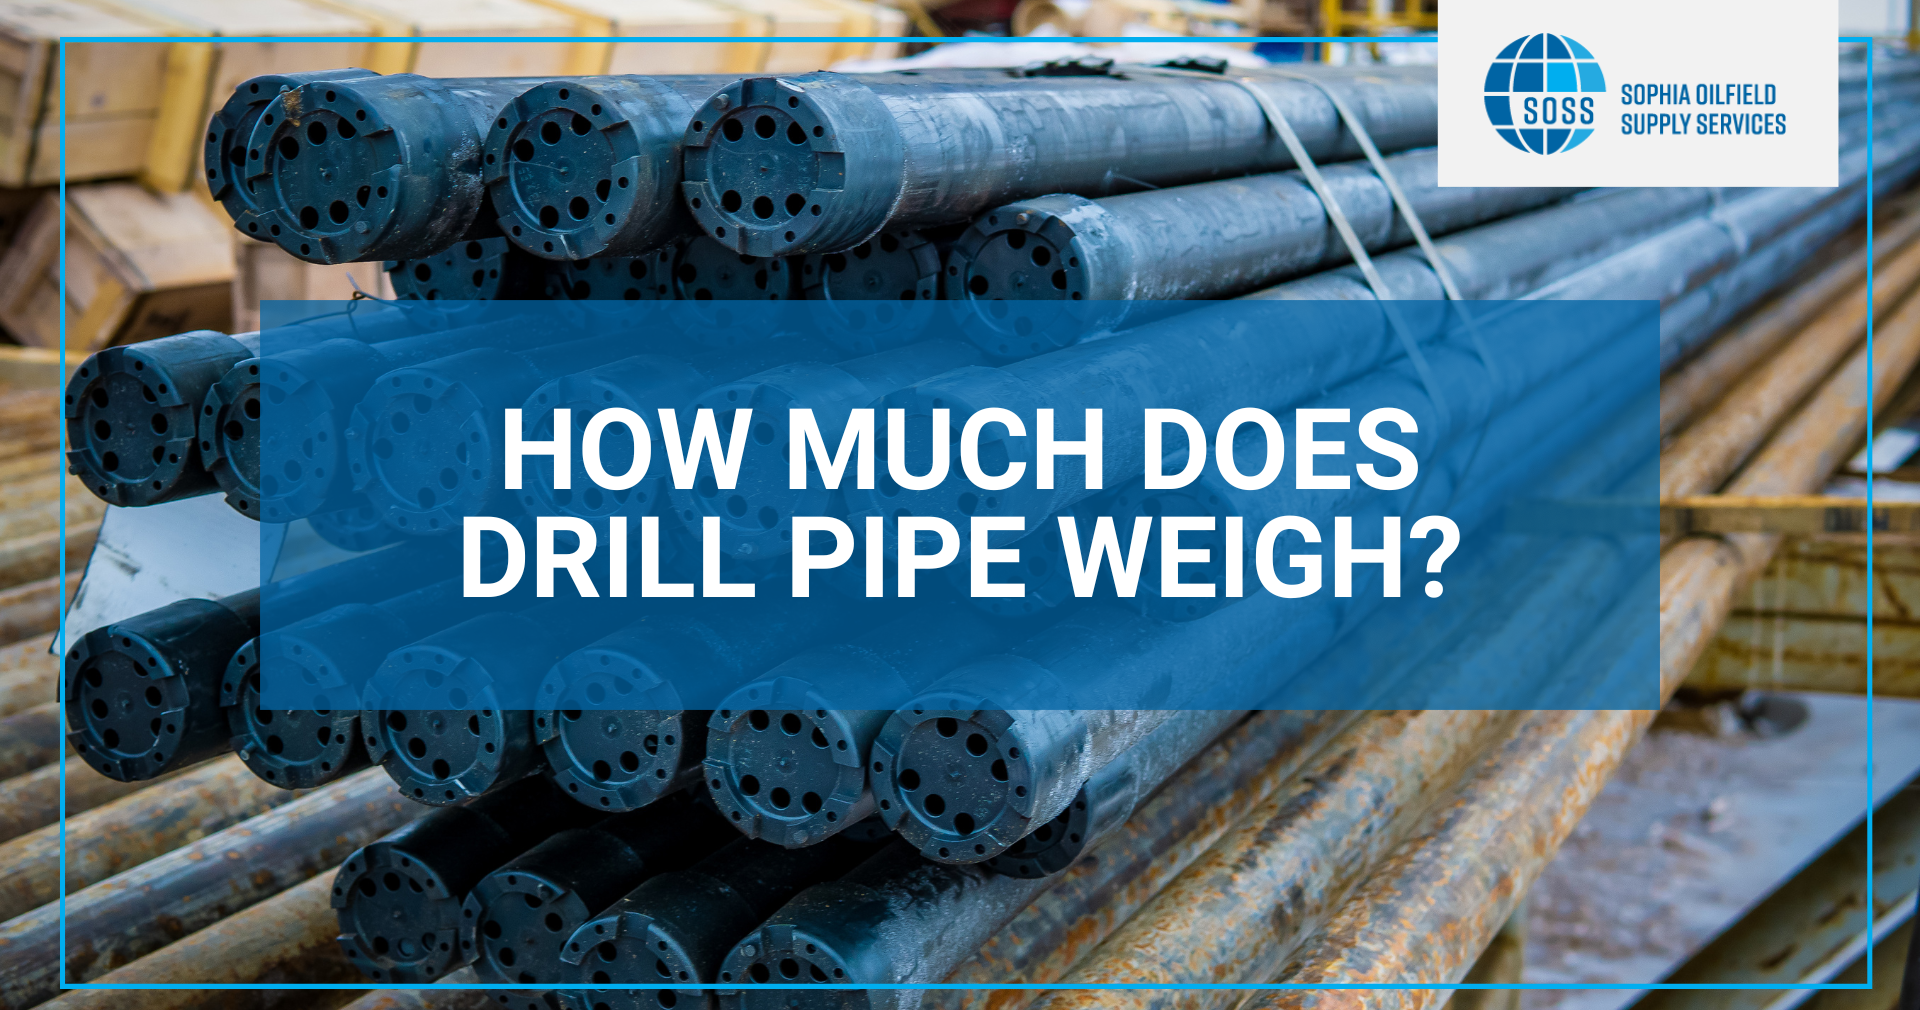 How Much Does Drill Pipe Weigh?